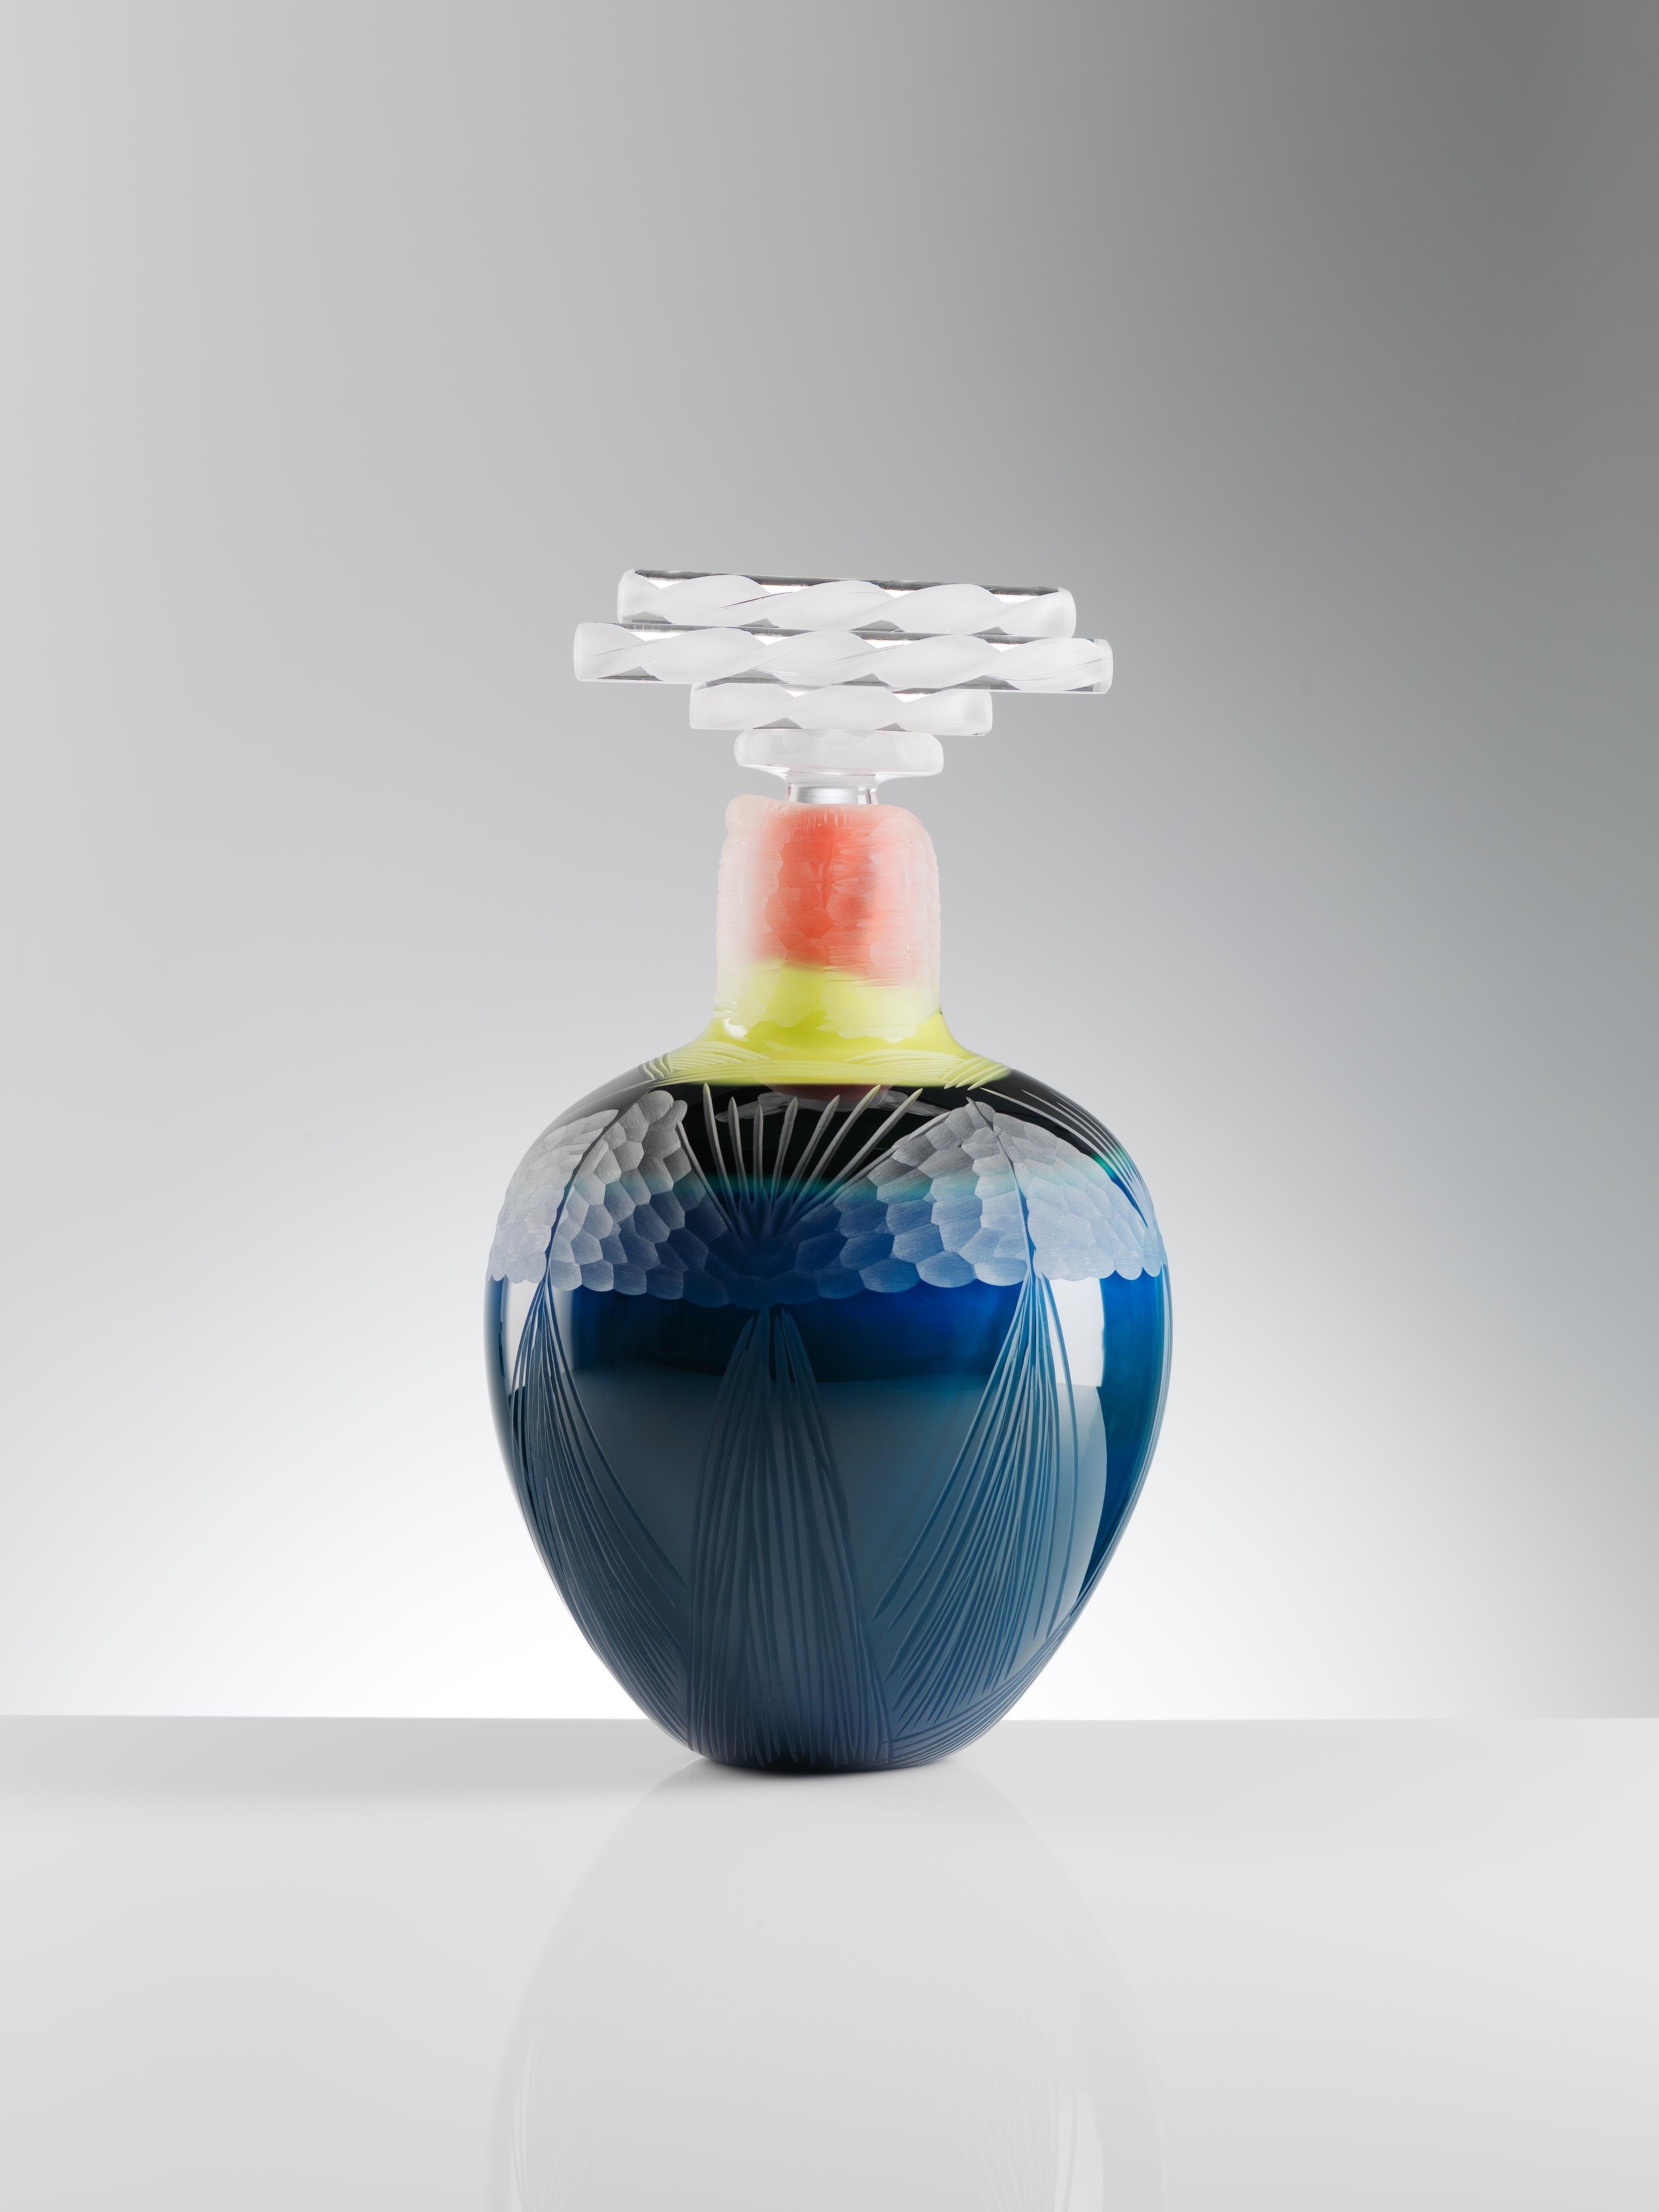 Lily Pad Blown Glass Vase Handmade by Juli Bolaños-durman For Sale 1